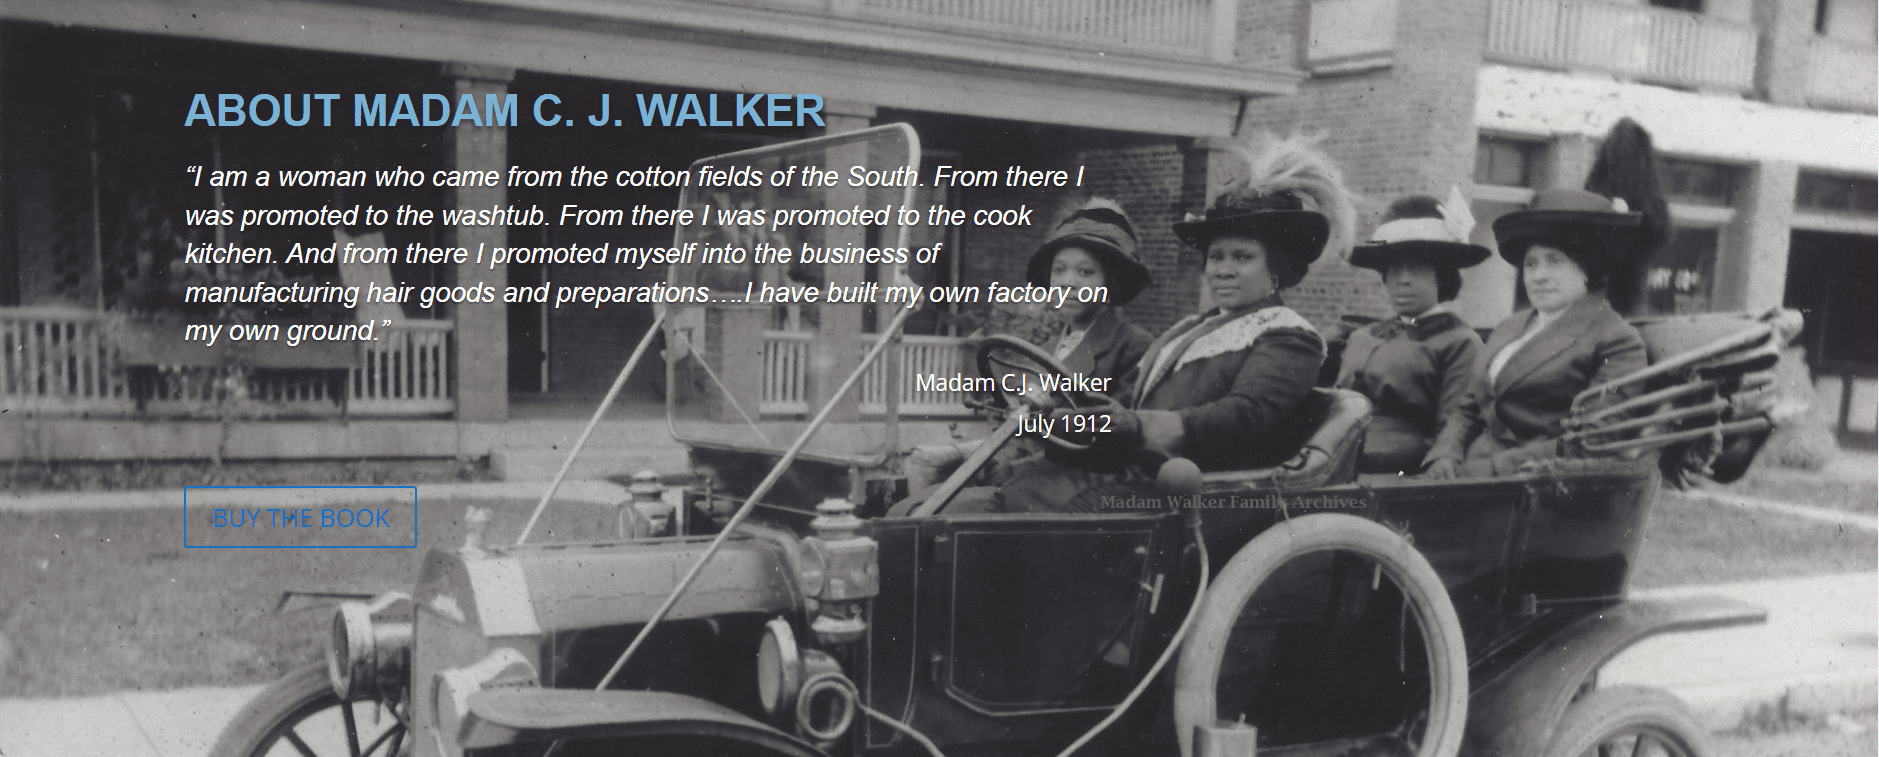 Photo of Madam C.J. Walker driving in the early 1900s, while building her business operation from the ground up.